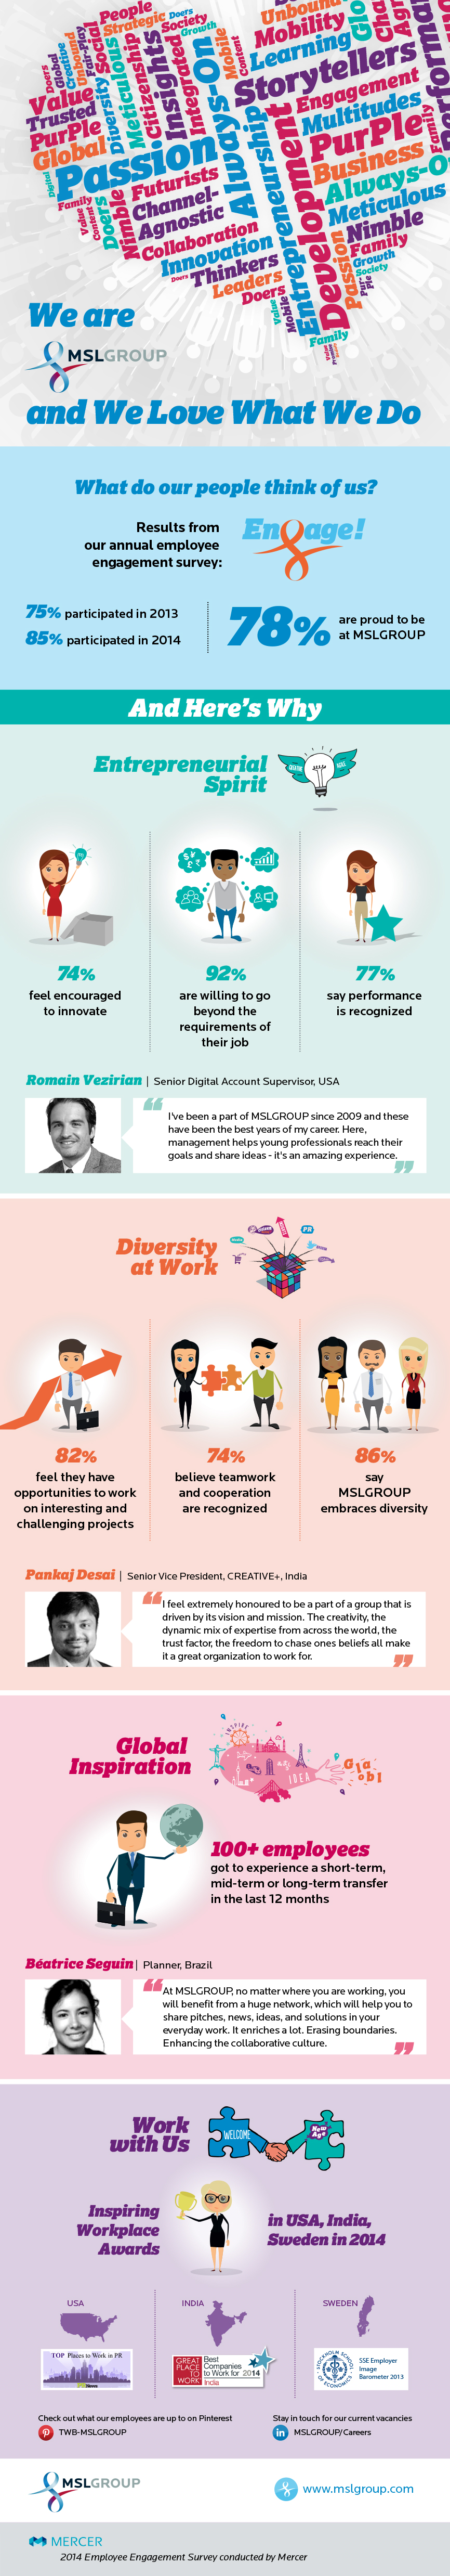 Engage! MSLGROUP Employee Survey Infographic | Visual.ly